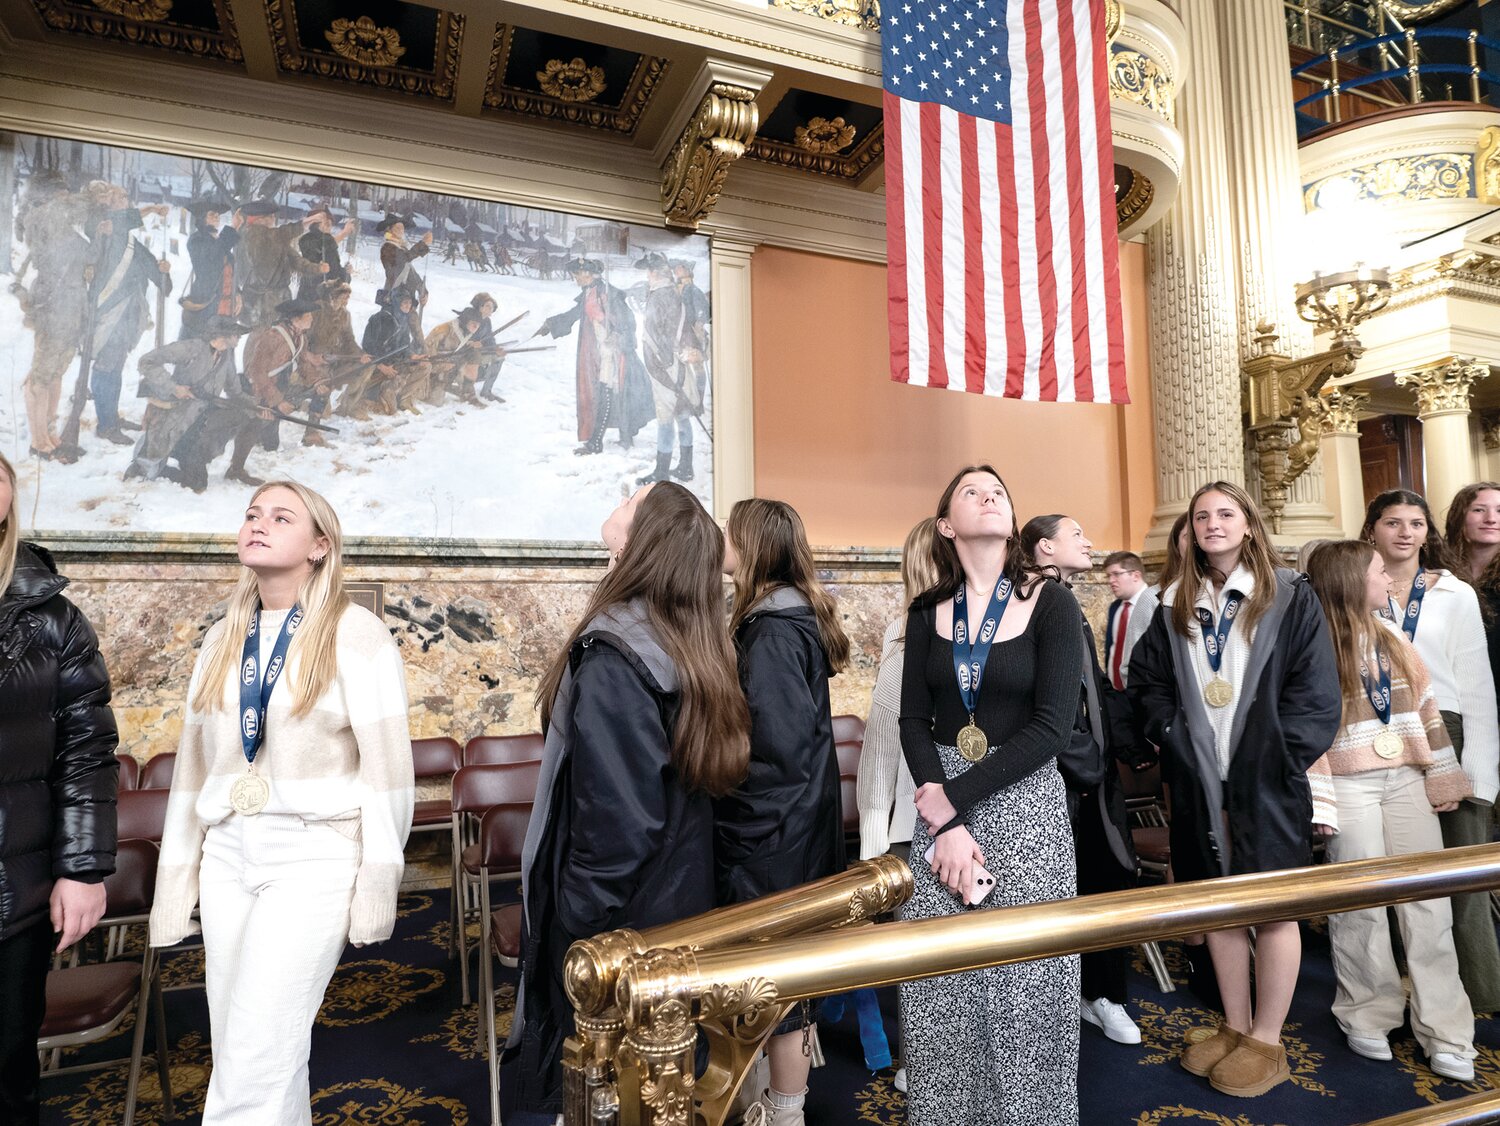 Members of the 2023 state championship Pennridge girls soccer team were recently honored on the floor of the Pennsylvania House of Representatives during a formal session.